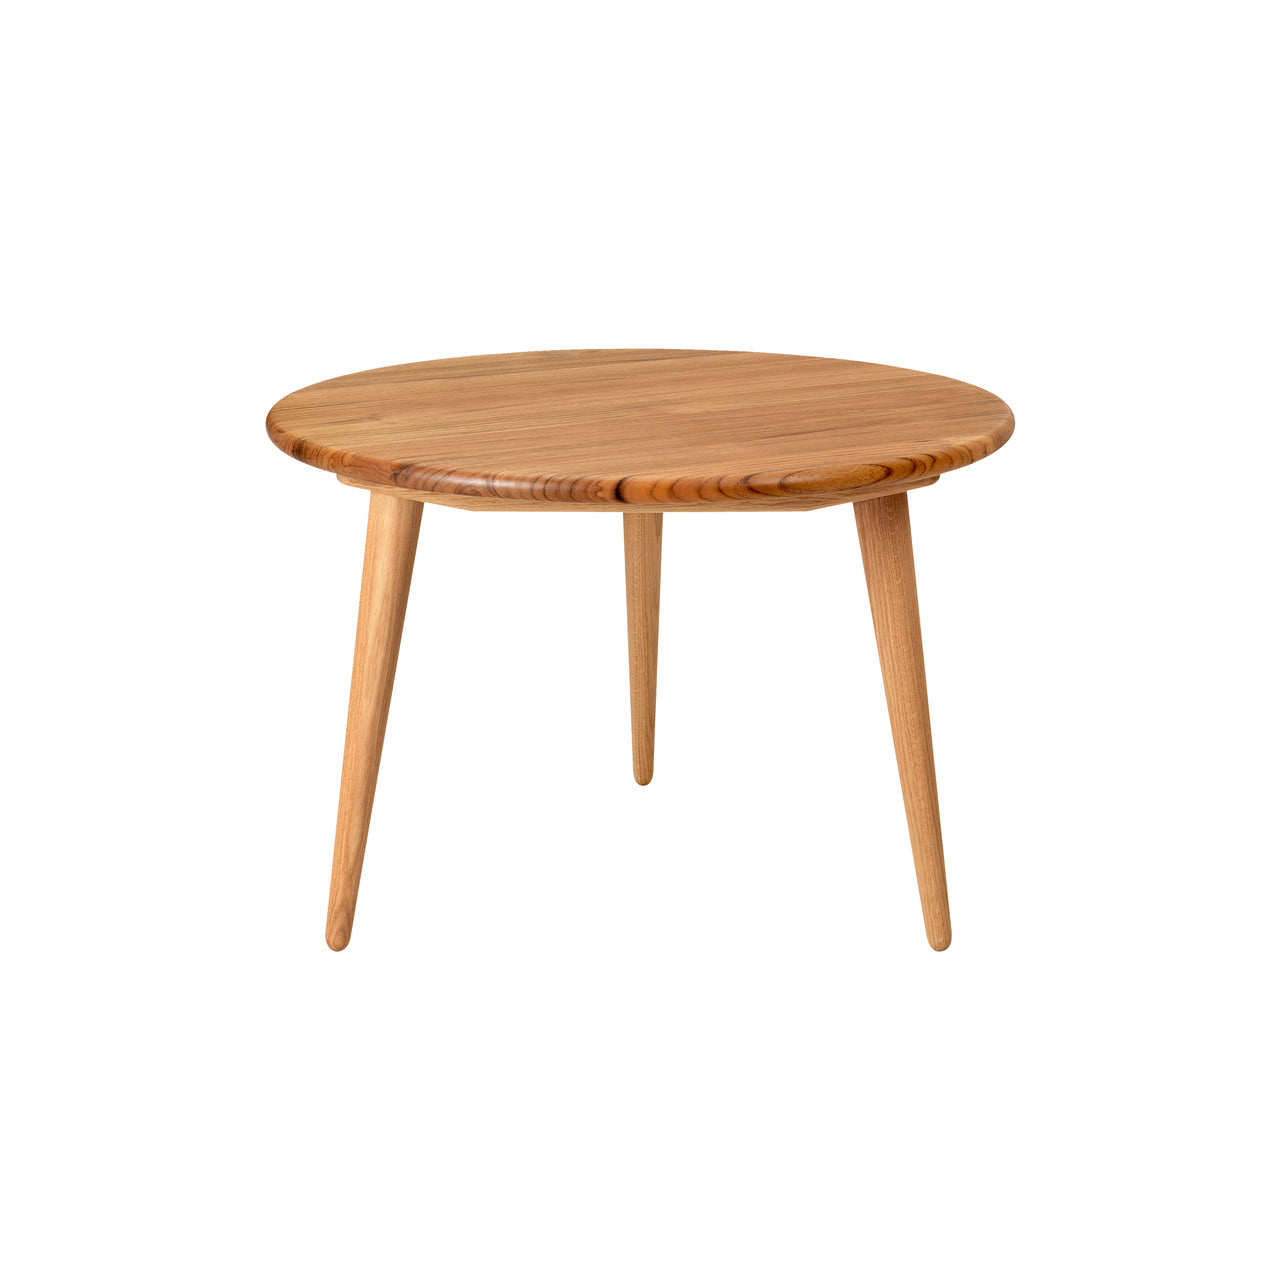 CH008 Coffee Table: Small - 30.7